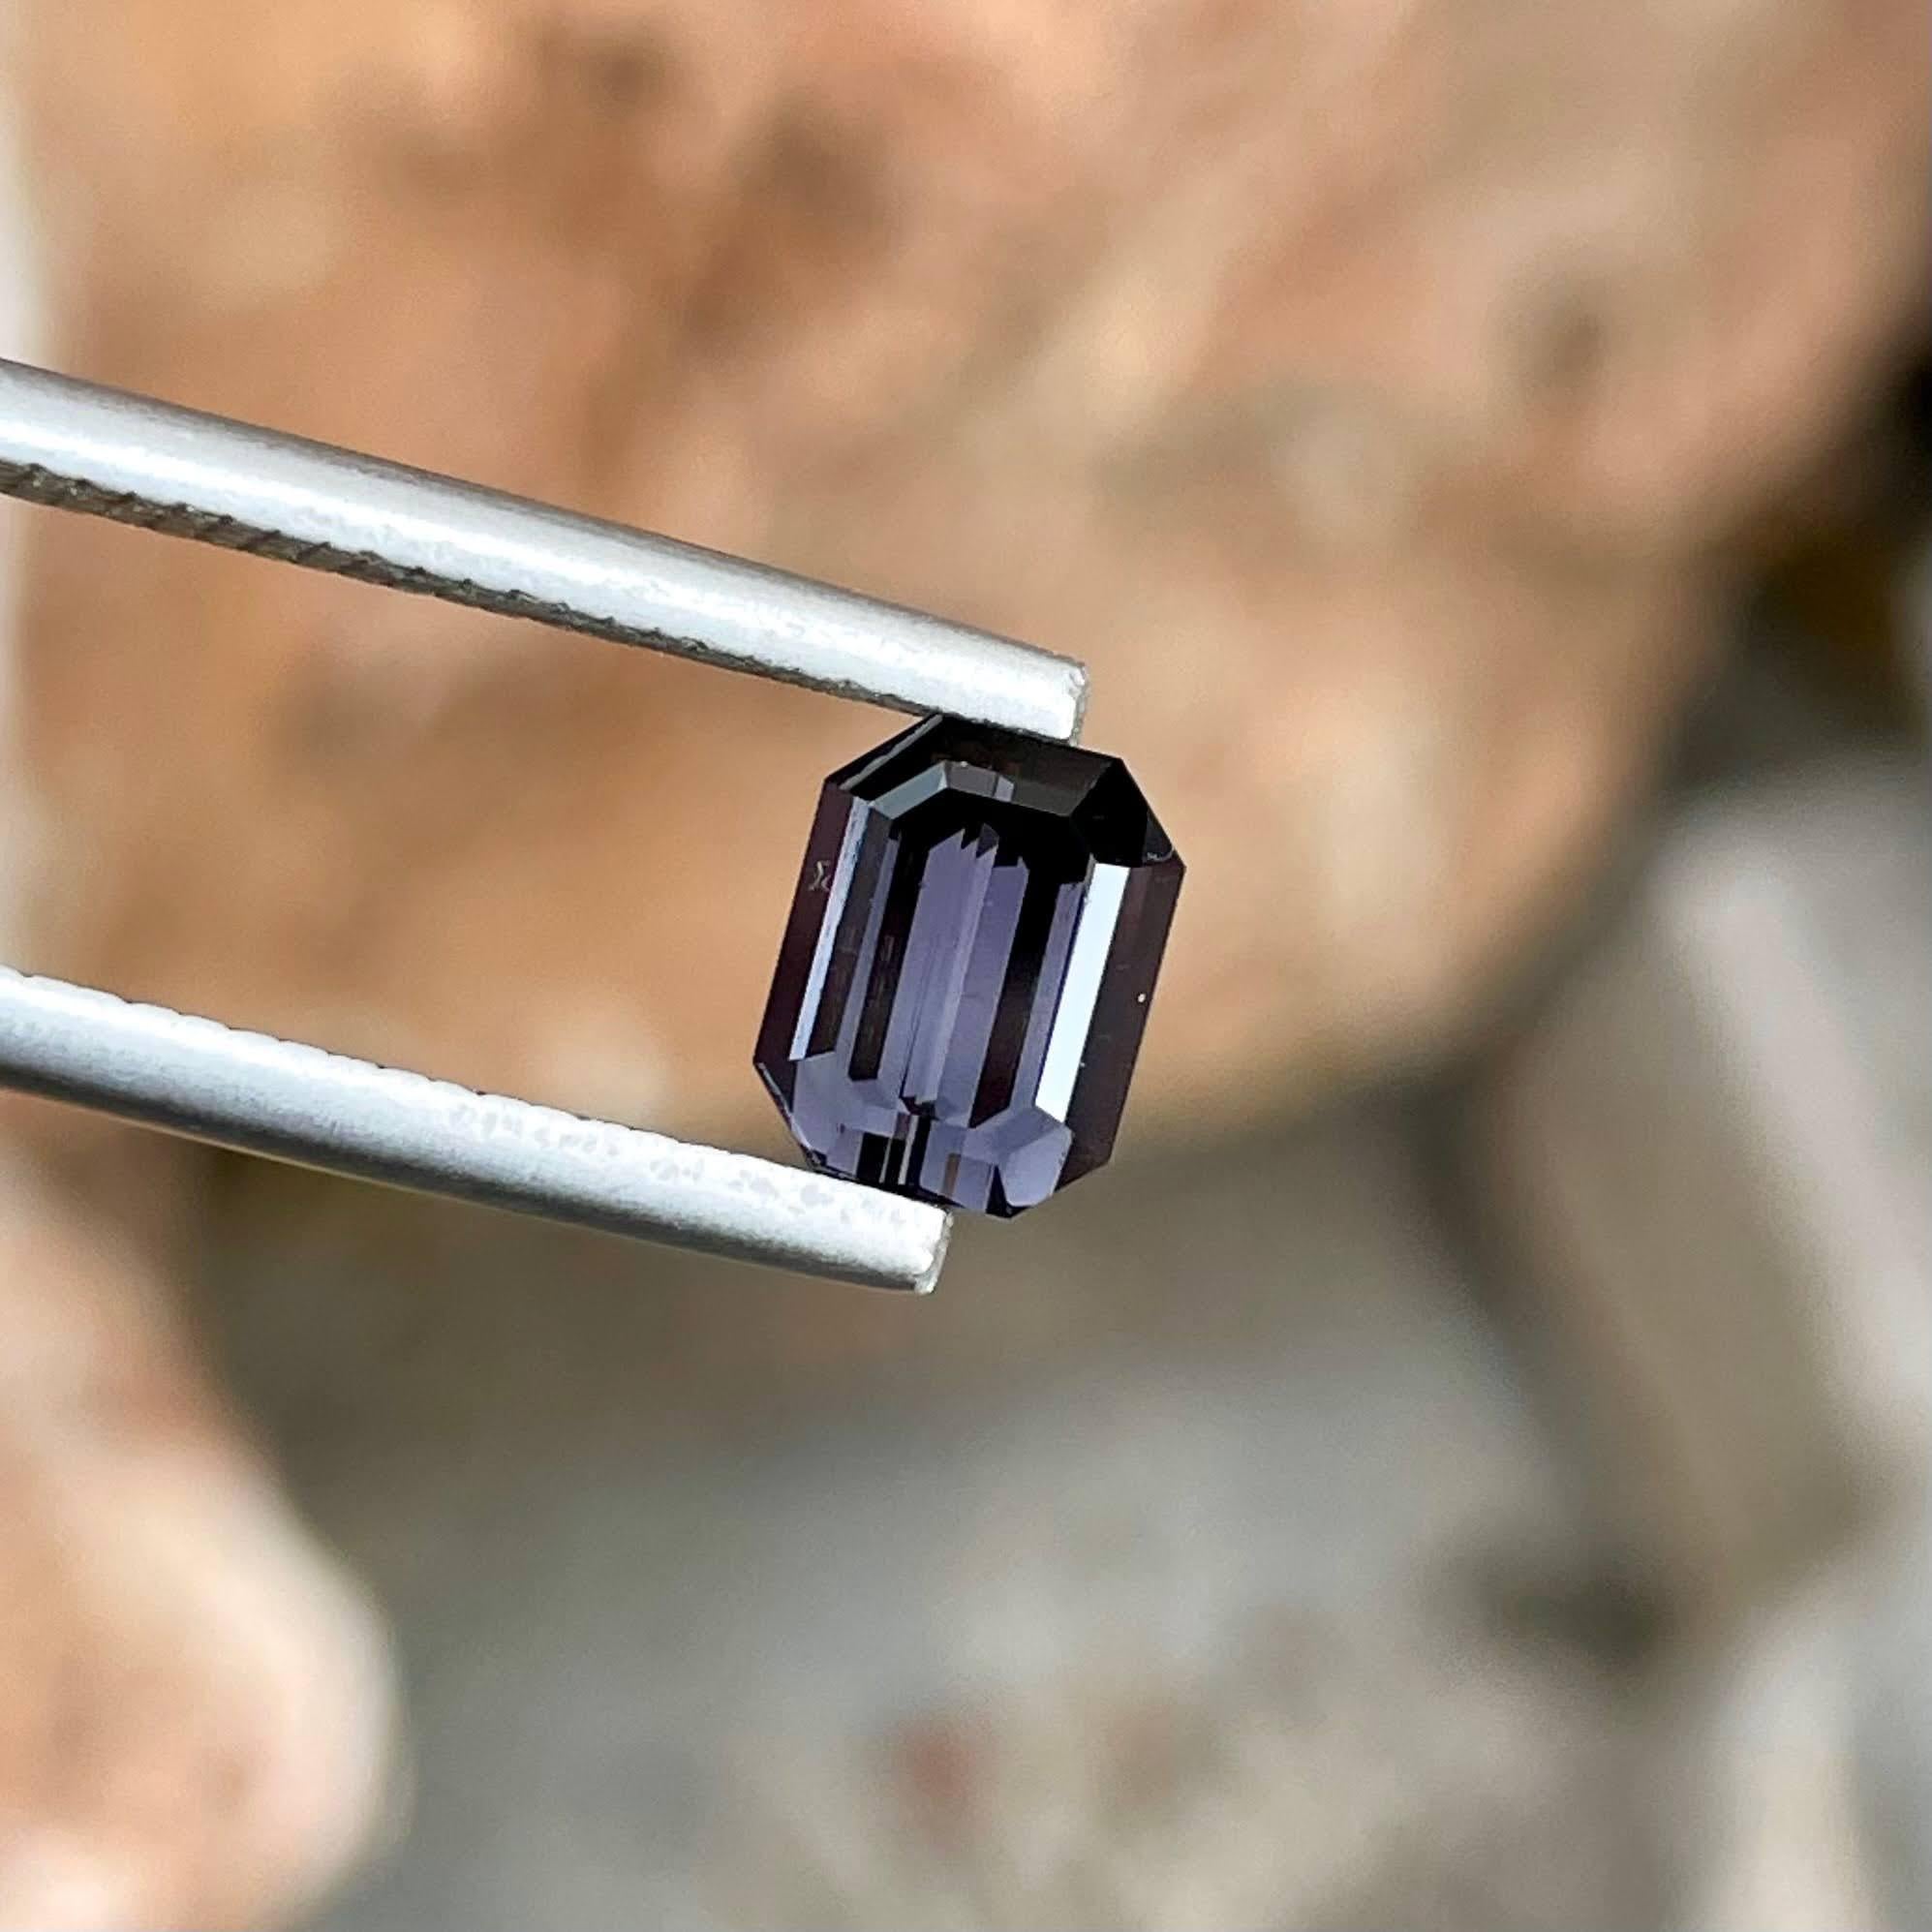 Weight 1.50 carats 
Dimensions 7.15x5.6x3.96 mm
Treatment none 
Clarity VVS
Origin Burma 
Shape octagon 
Cut emerald 




The 1.50 carats Deep Gray Burmese Spinel Stone is a captivating natural gemstone renowned for its elegant beauty and inherent